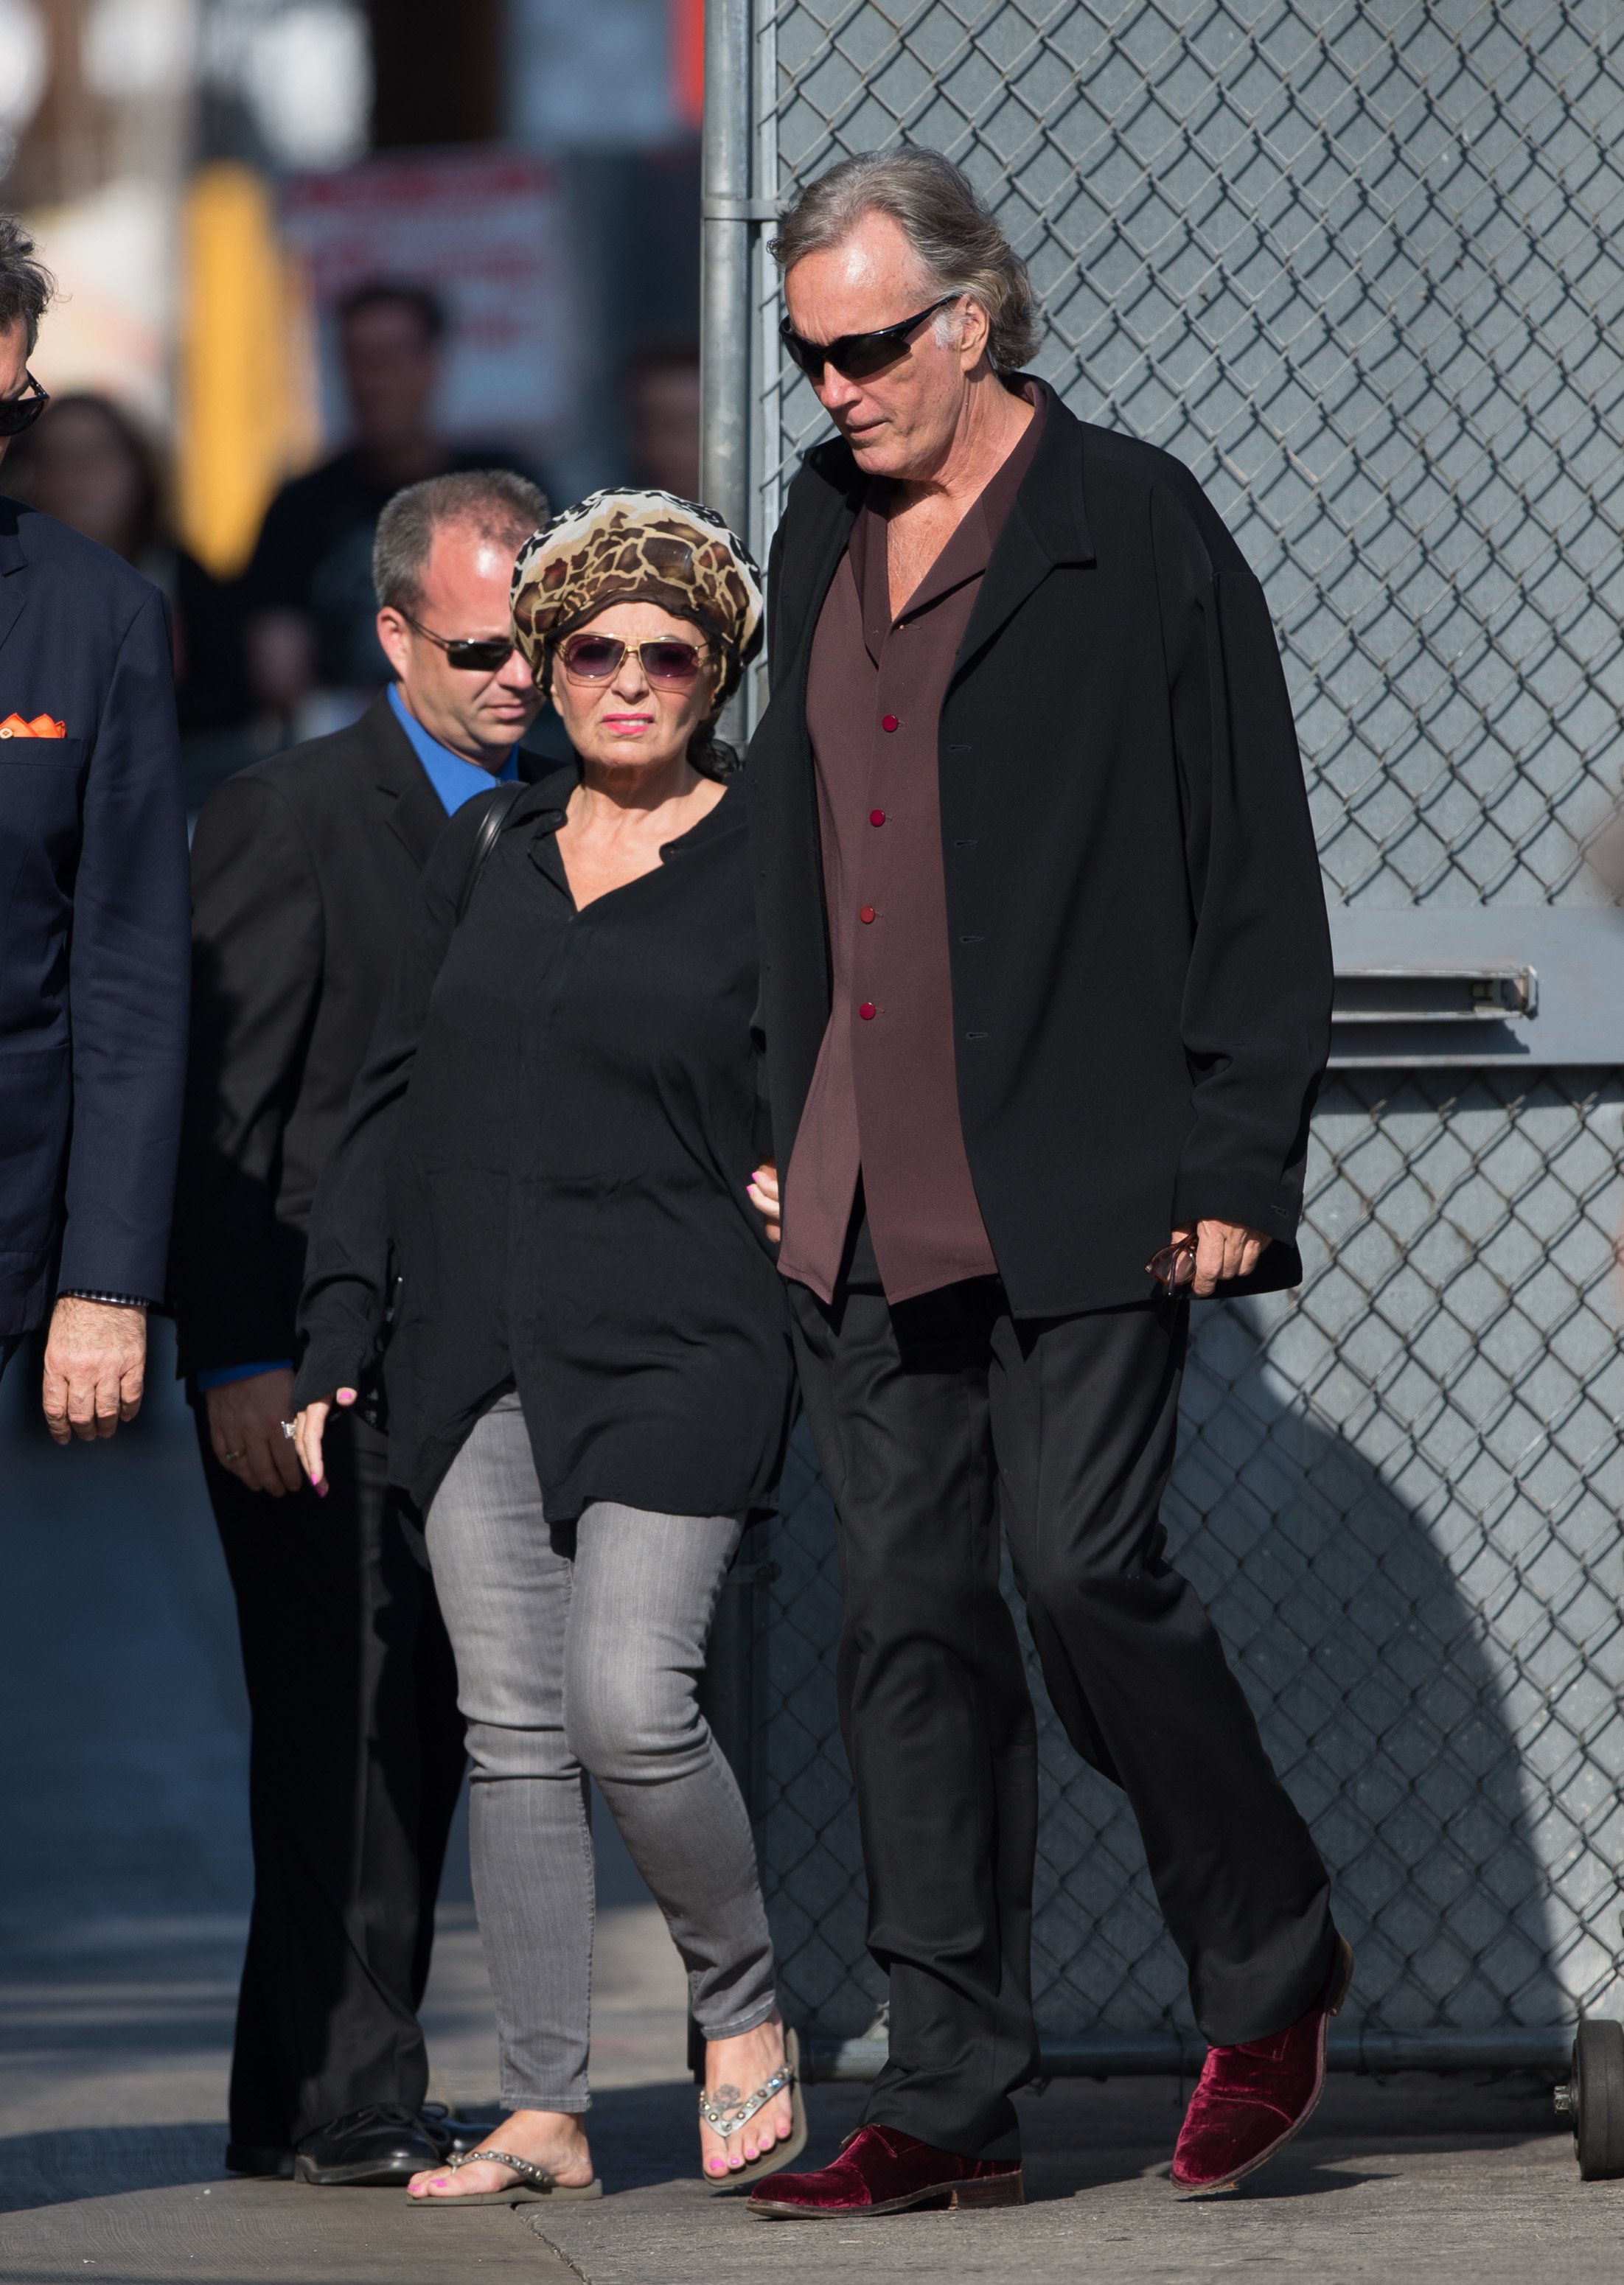 Roseanne Barr and Johnny Argent strolling on June 24, 2014, in Los Angeles, California. | Source: Getty Images